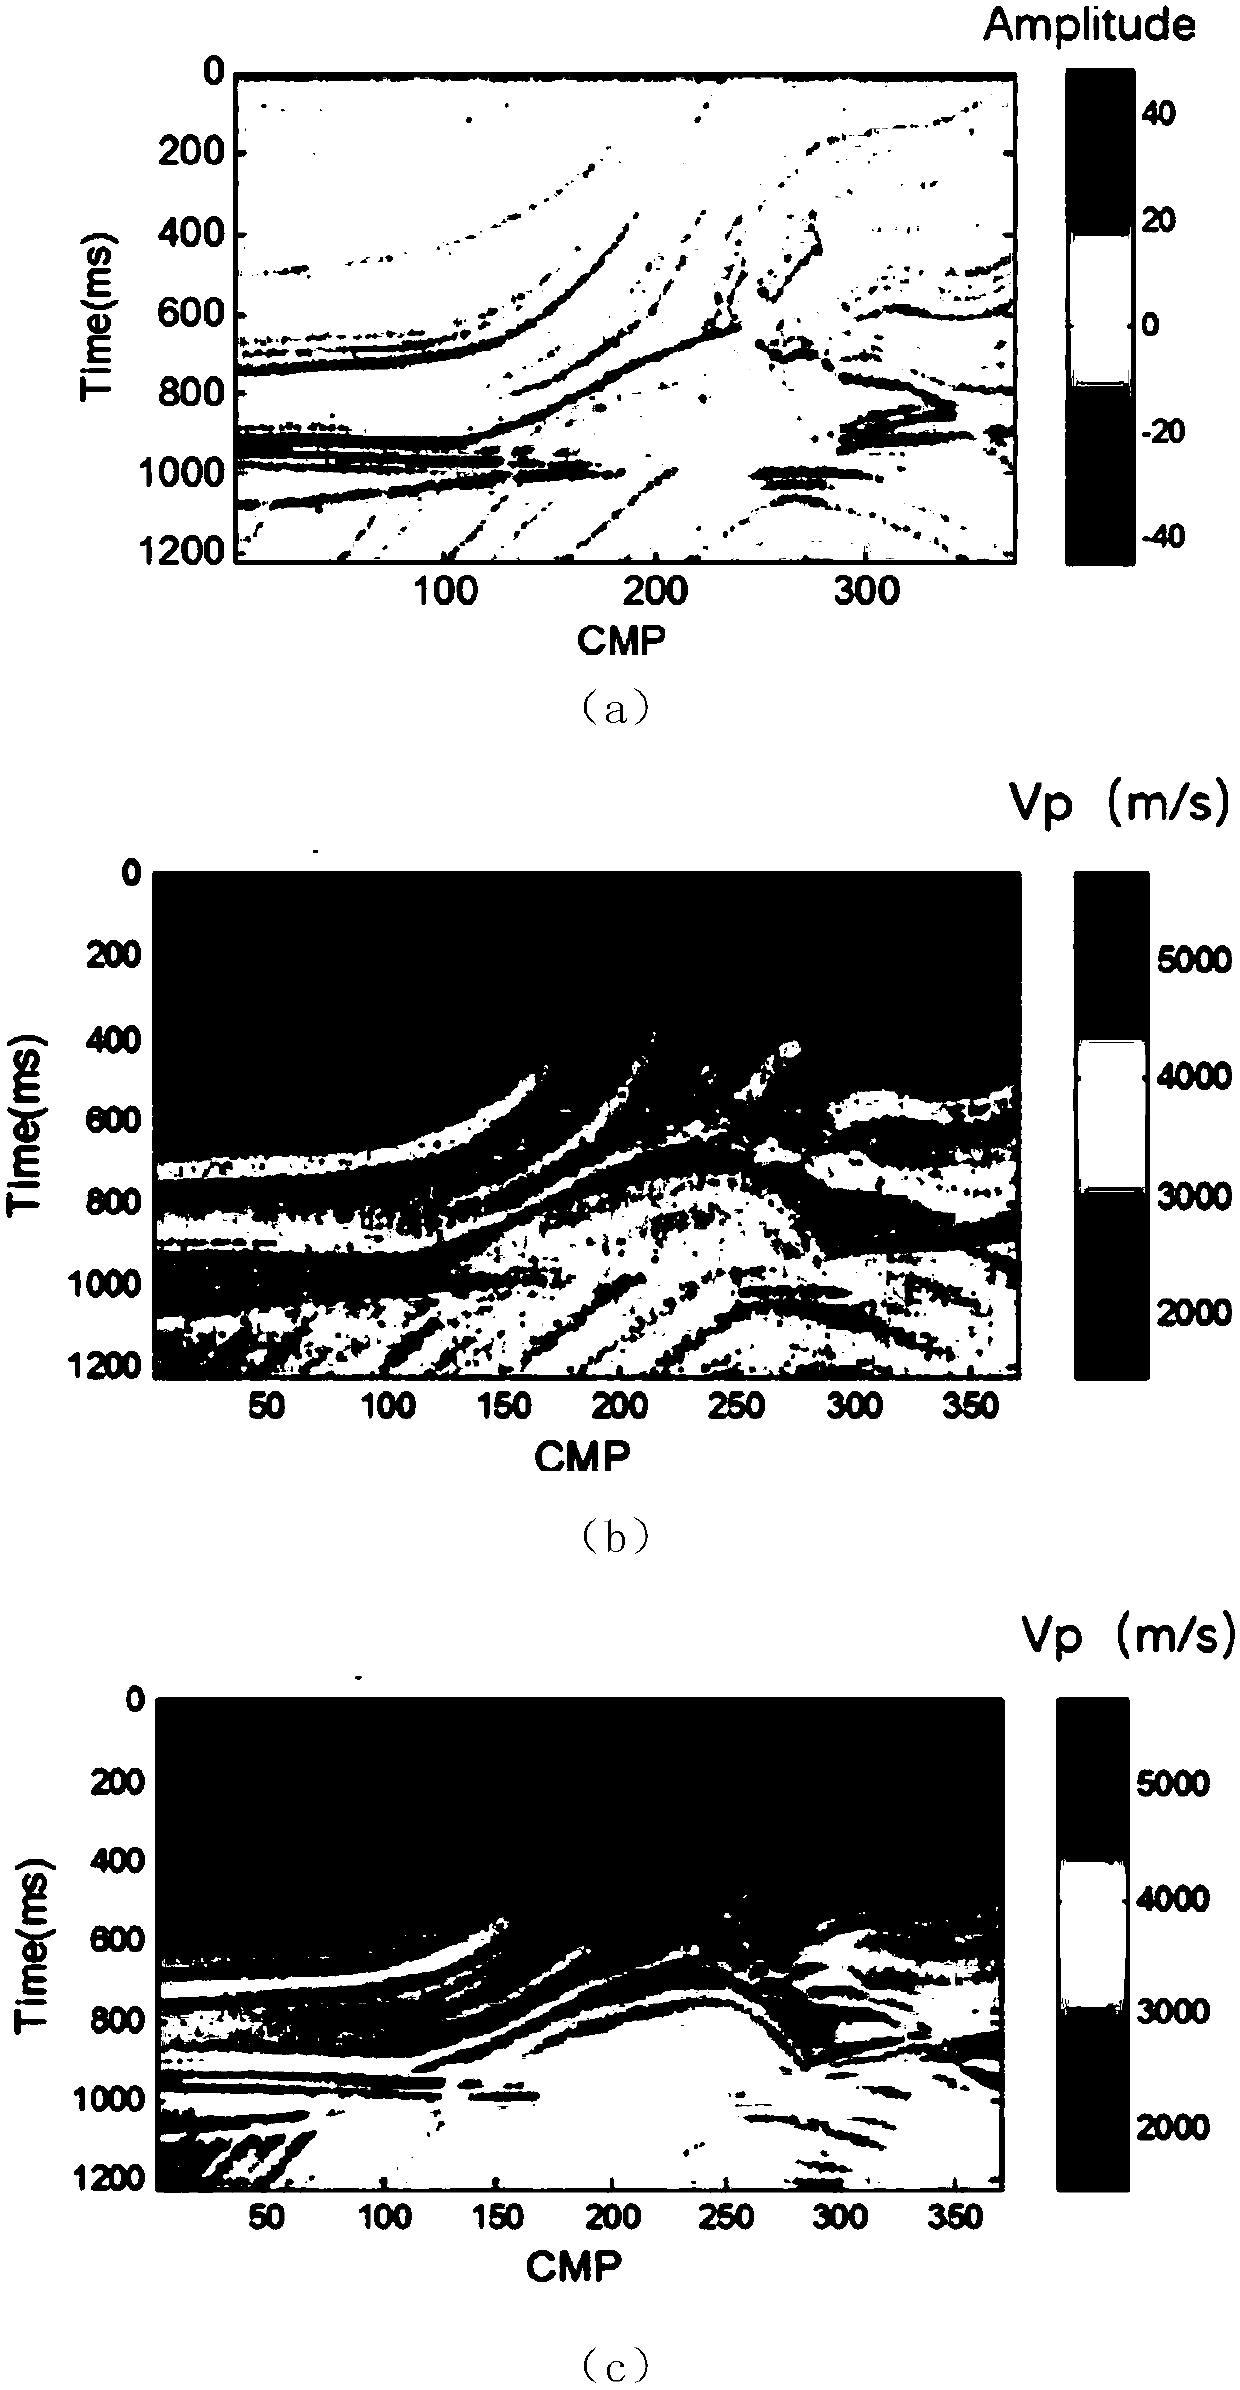 Maximum-joint-entropy-based post-stack seismic wave impedance inversion method